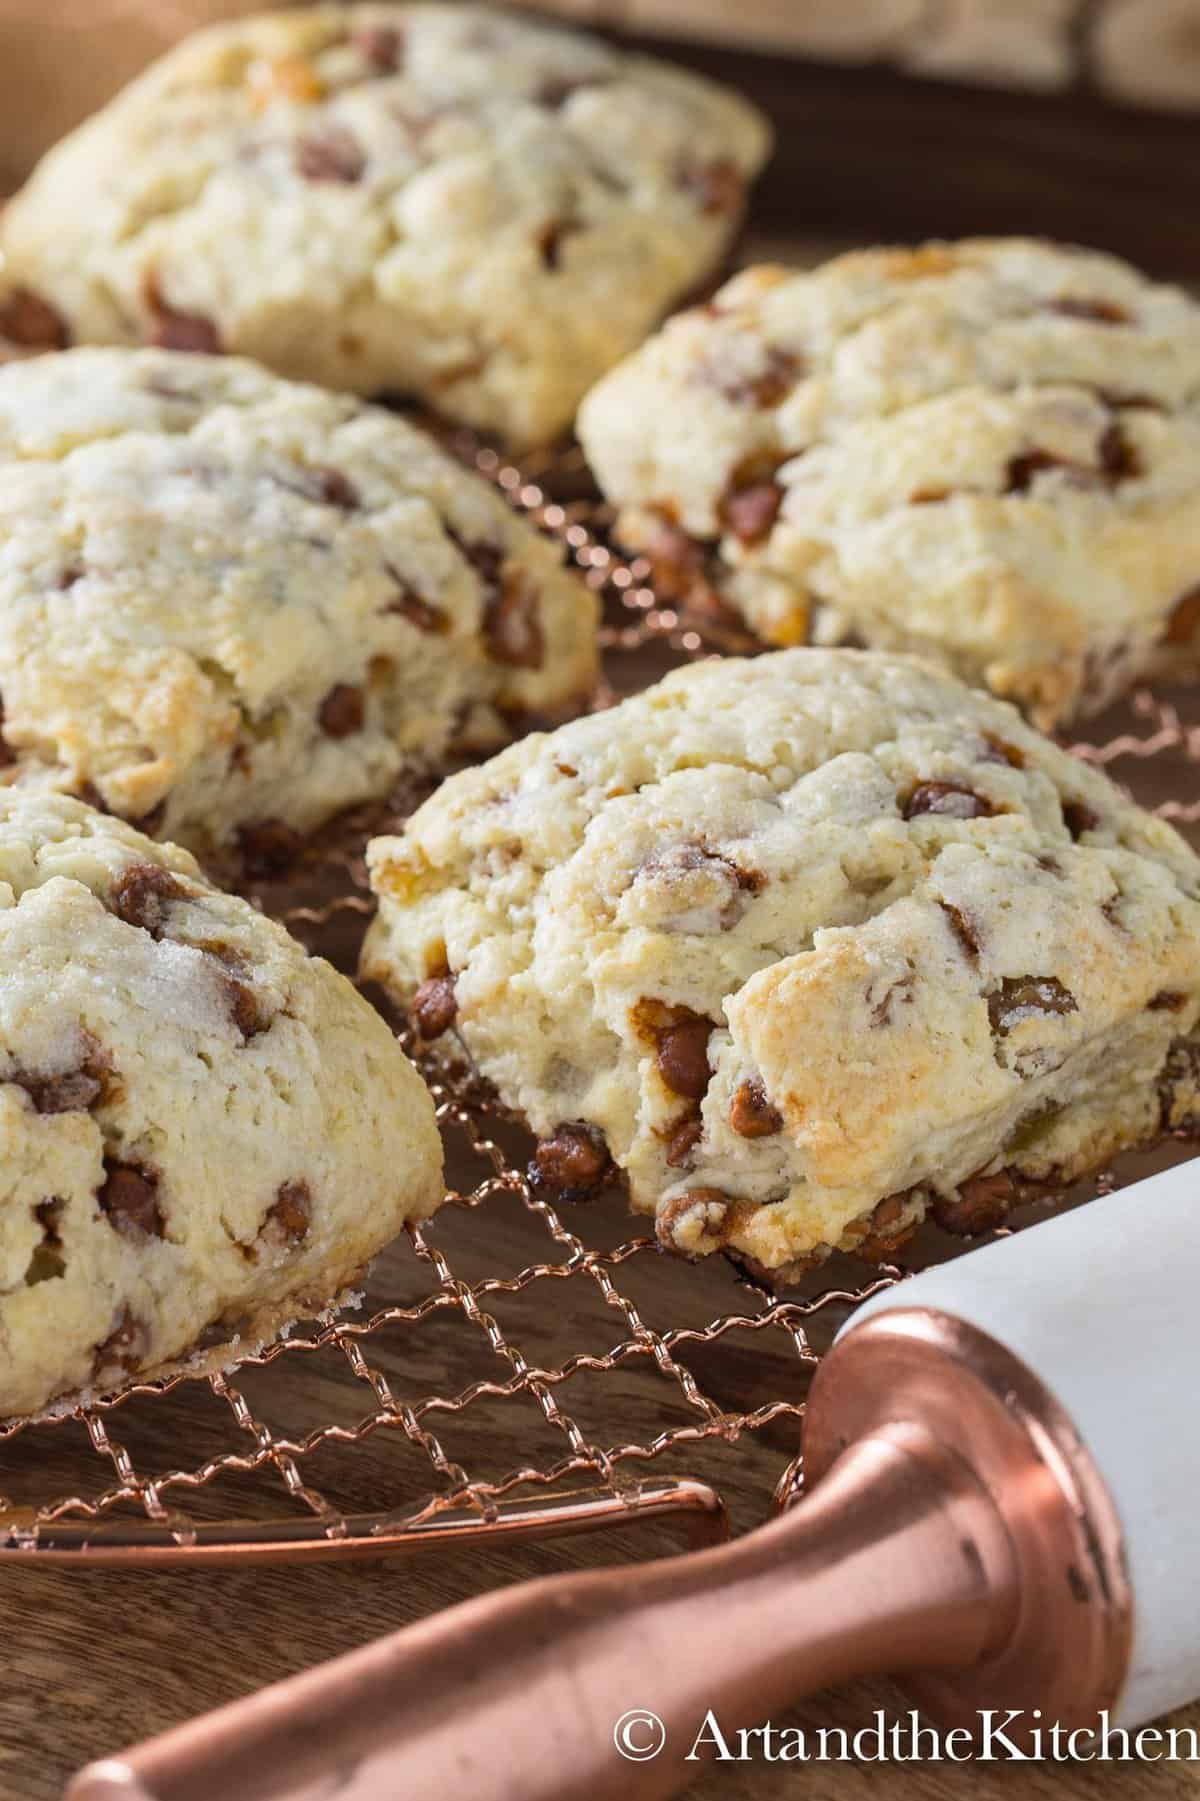  These scones are perfect for a cozy morning breakfast with a cup of hot coffee or tea.